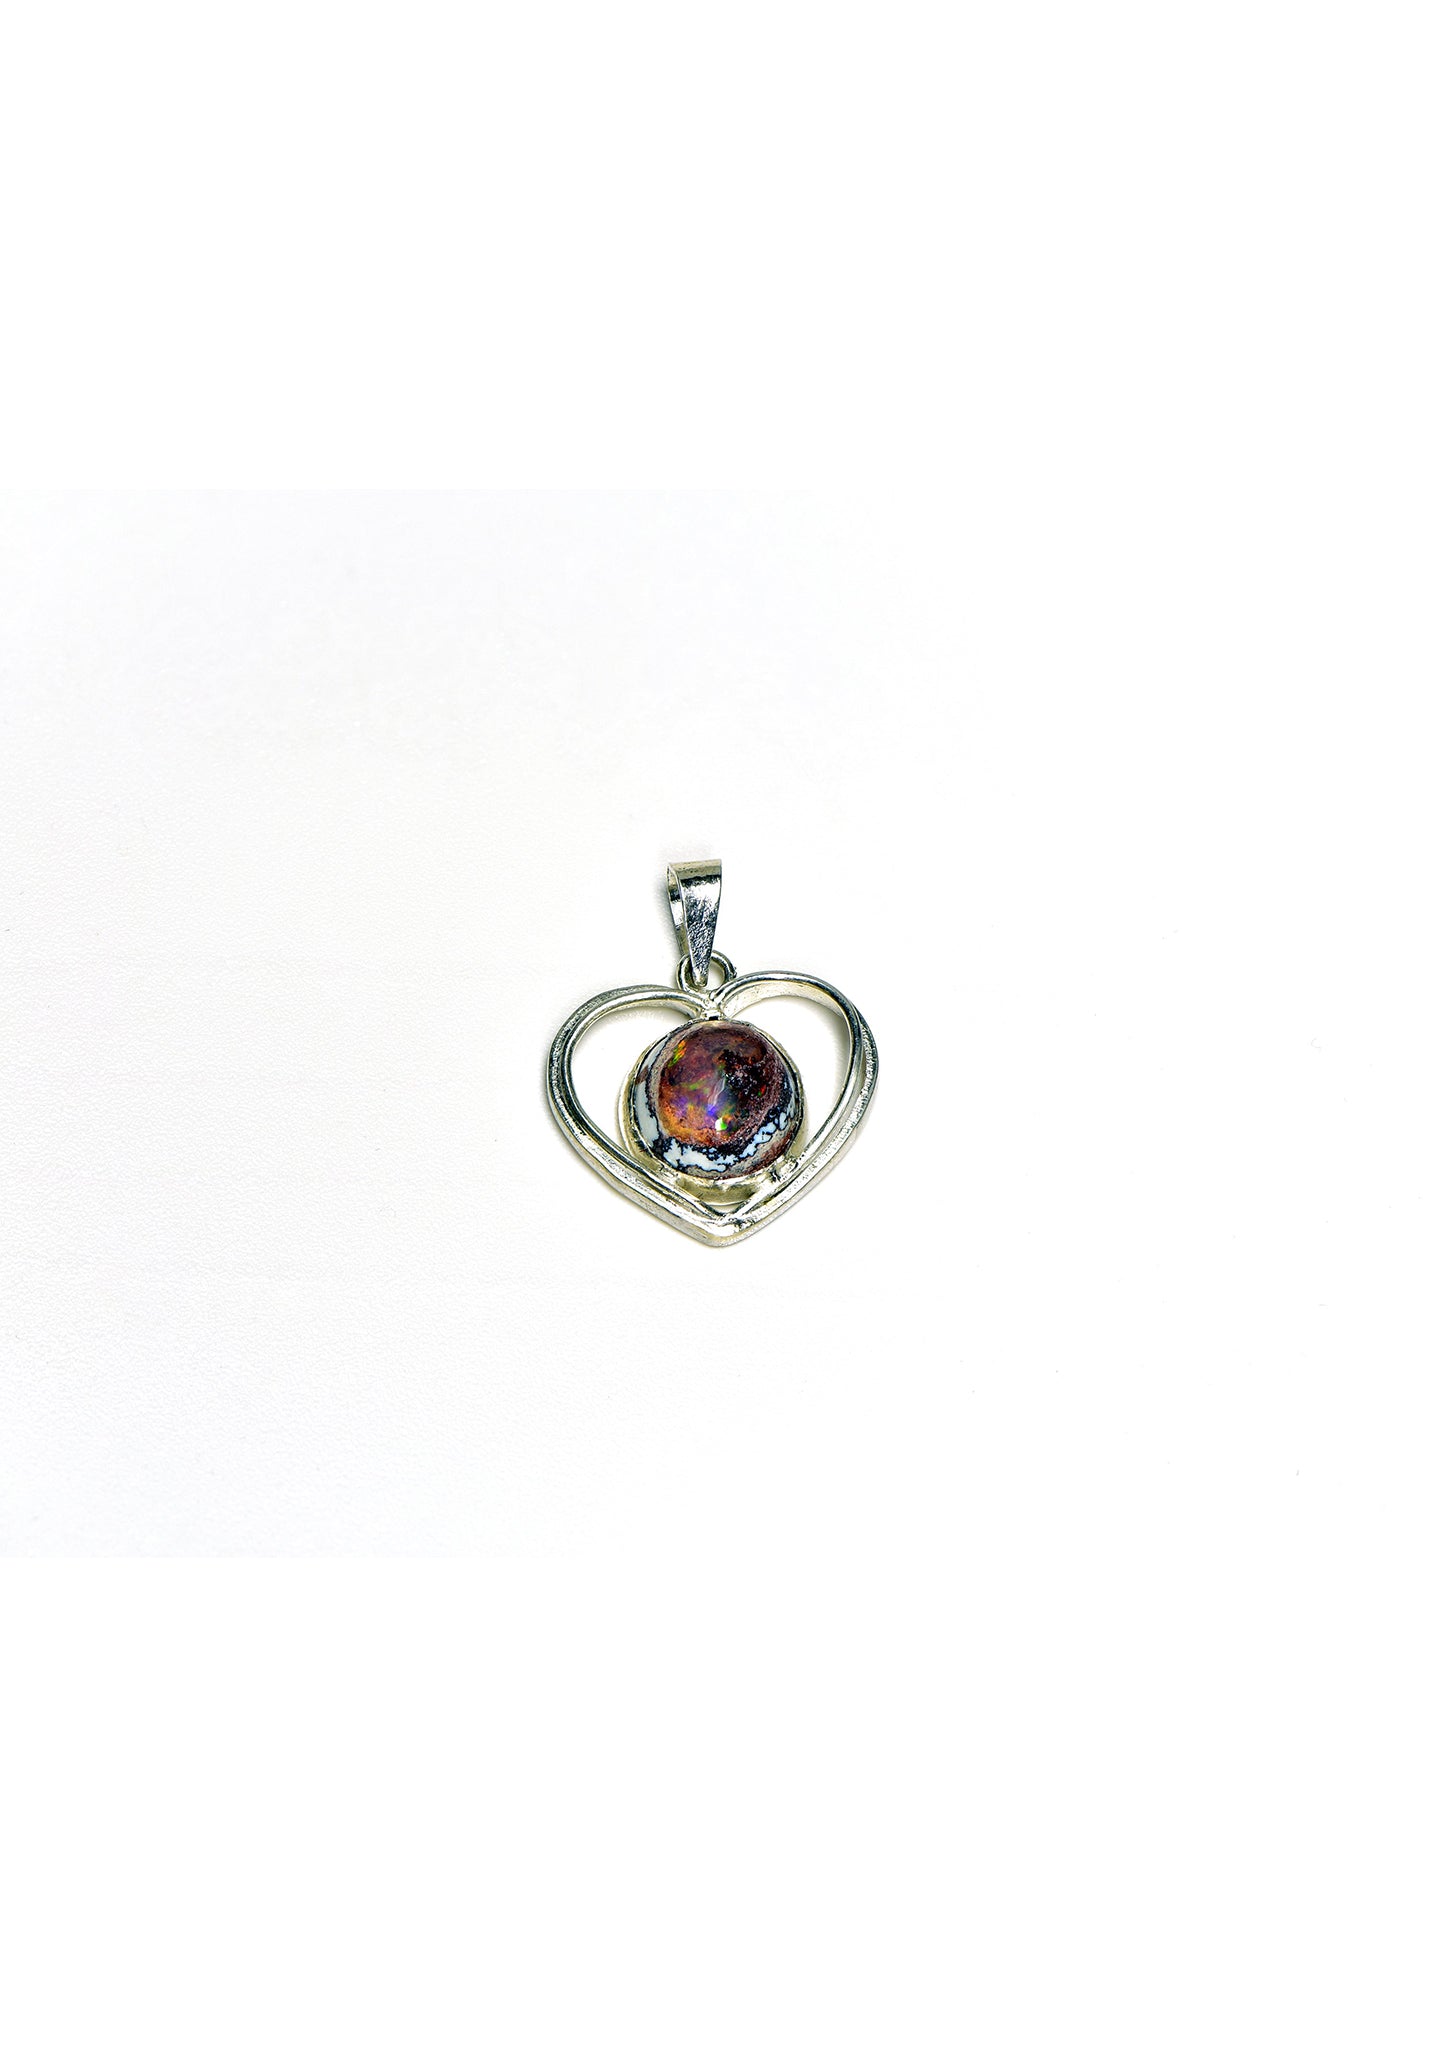 Mexican Opal Sterling Silver Heart Pendant - LilianaMexican Opal Sterling Silver Heart Pendant - Liliana 2